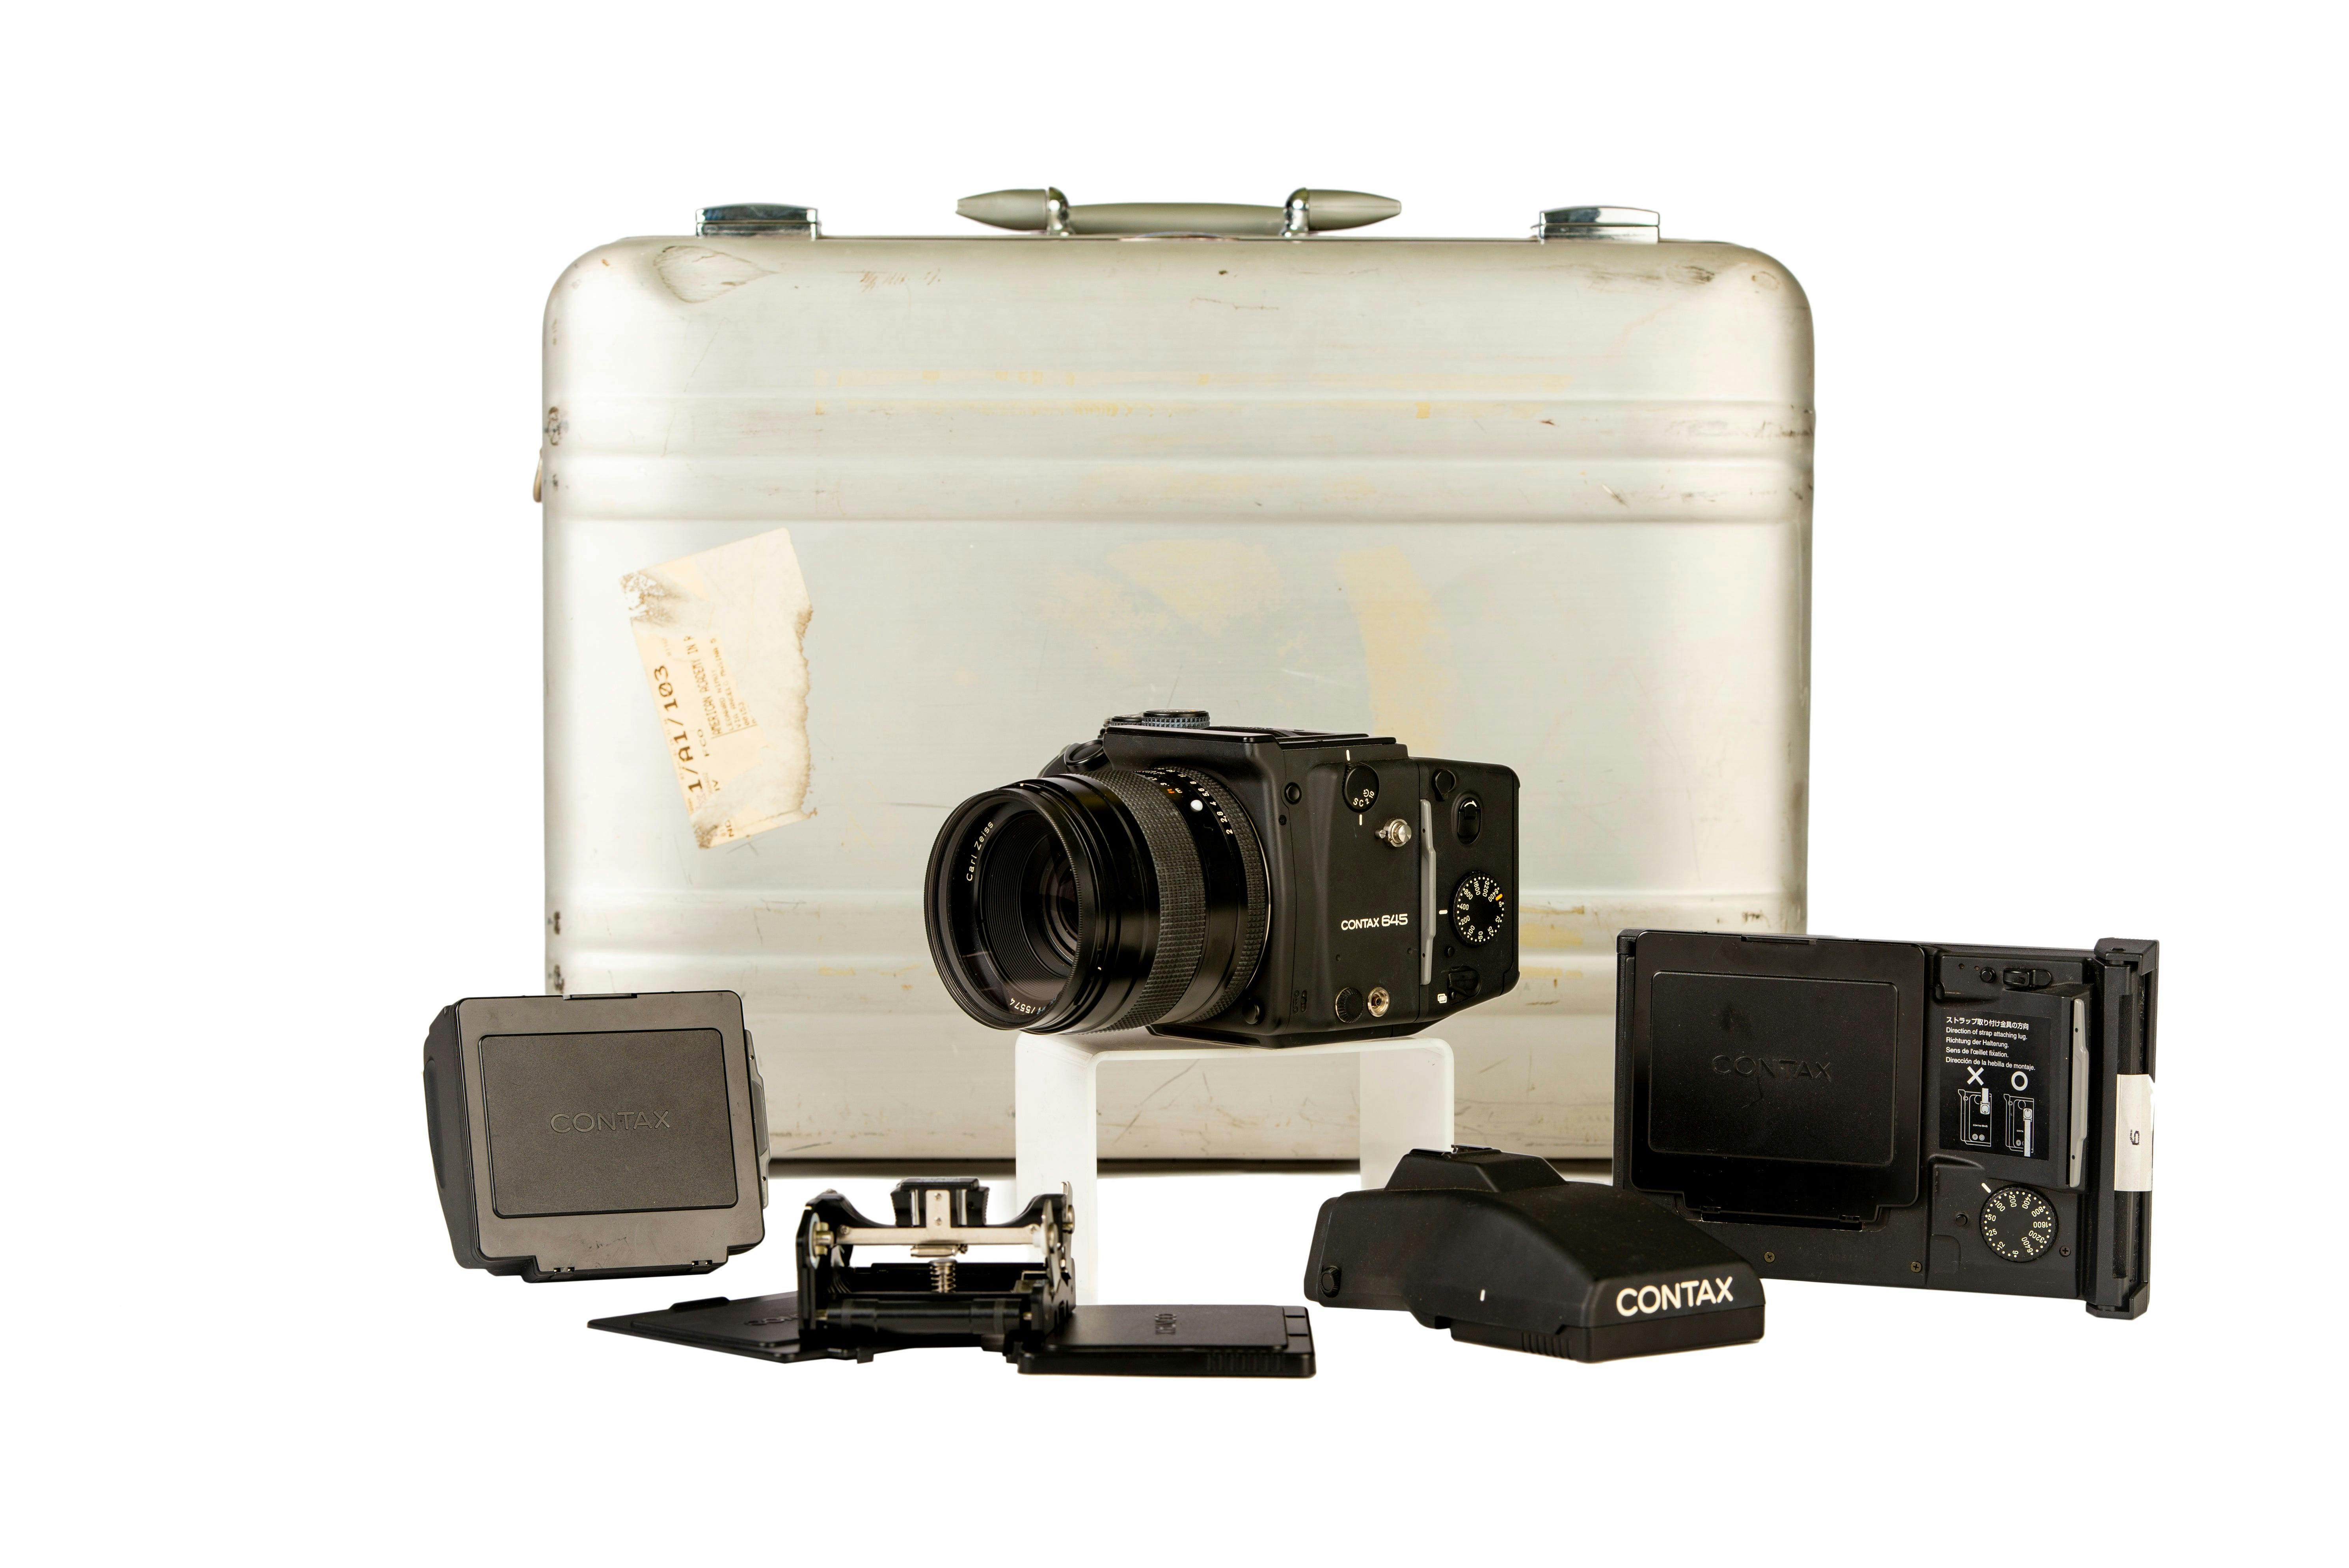 Leonard Nimoy Personal Contax 645 Camera Equipment with Photos from the Collection of Leonard Nimoy